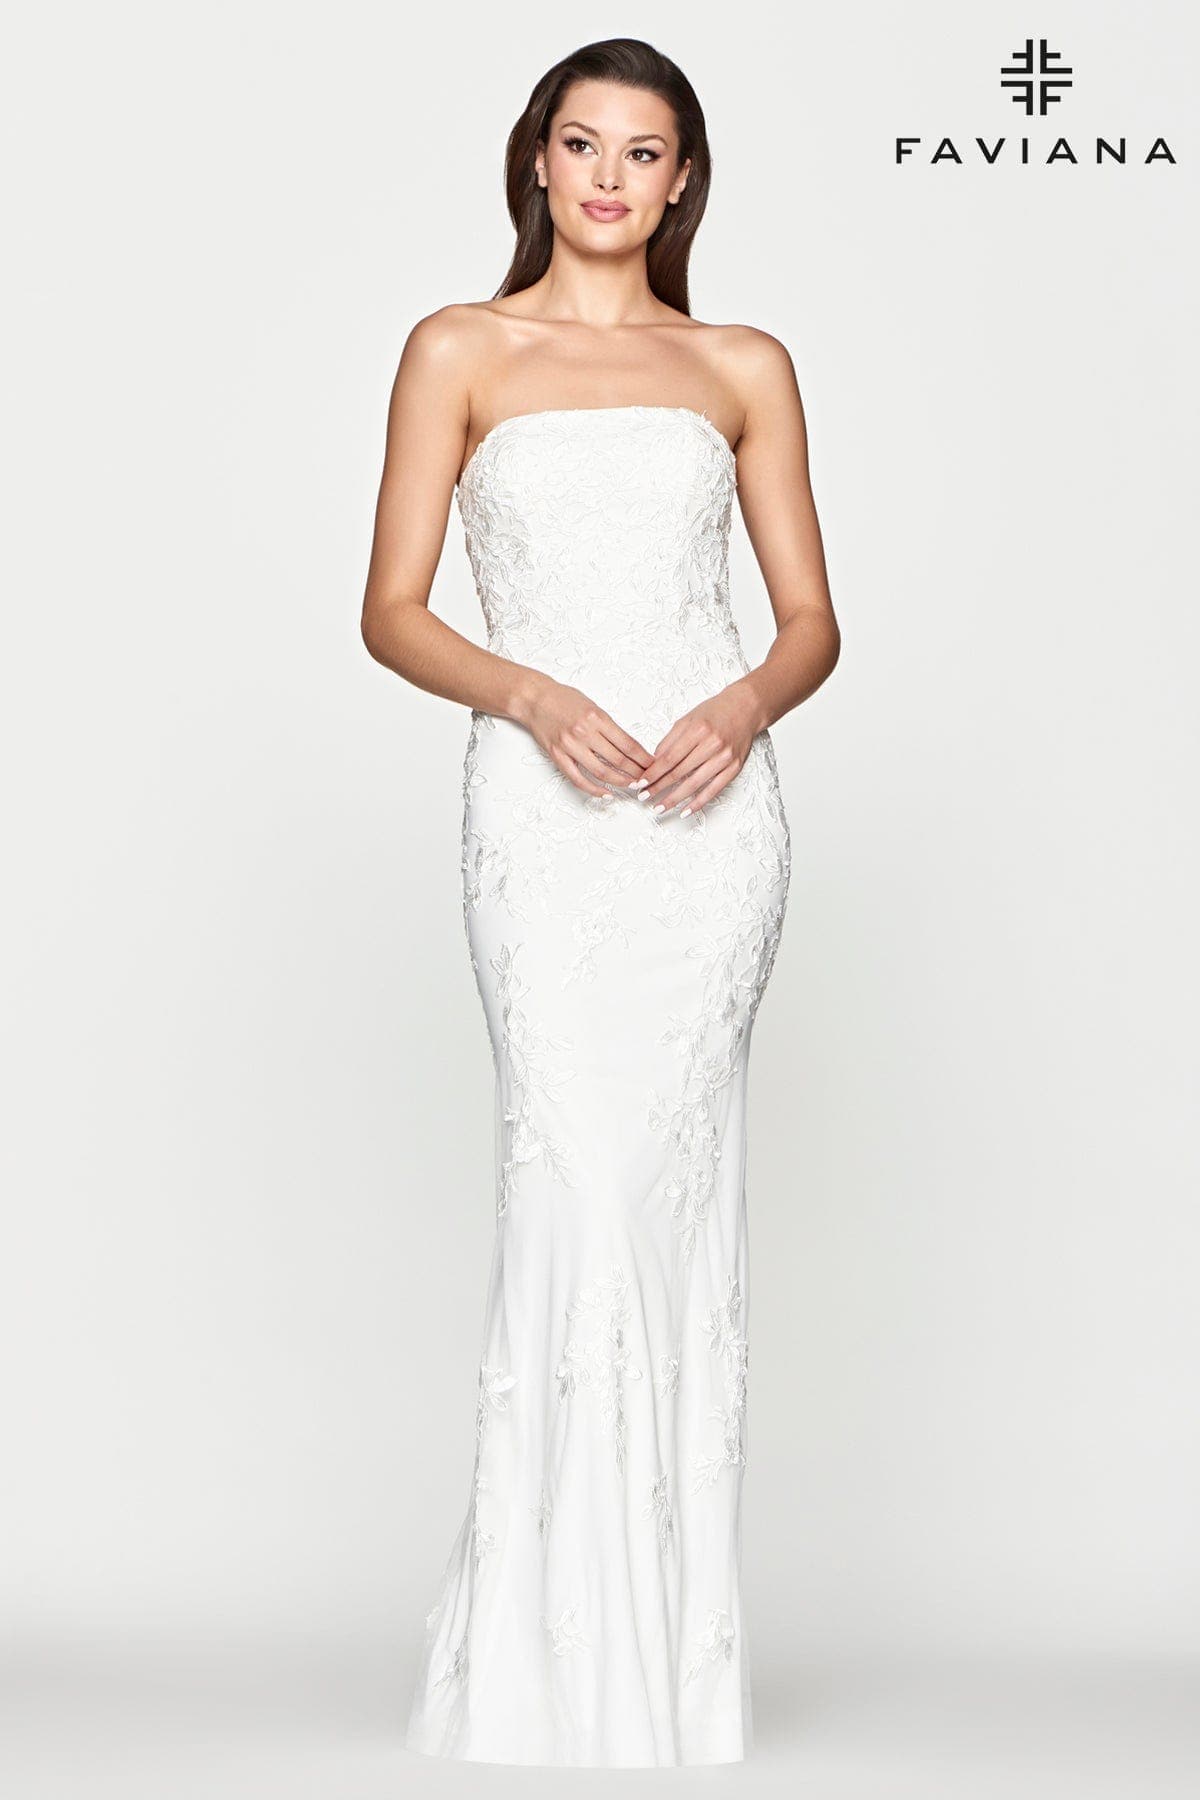 Straight Neckline Dress Strapless With Lace Fabric